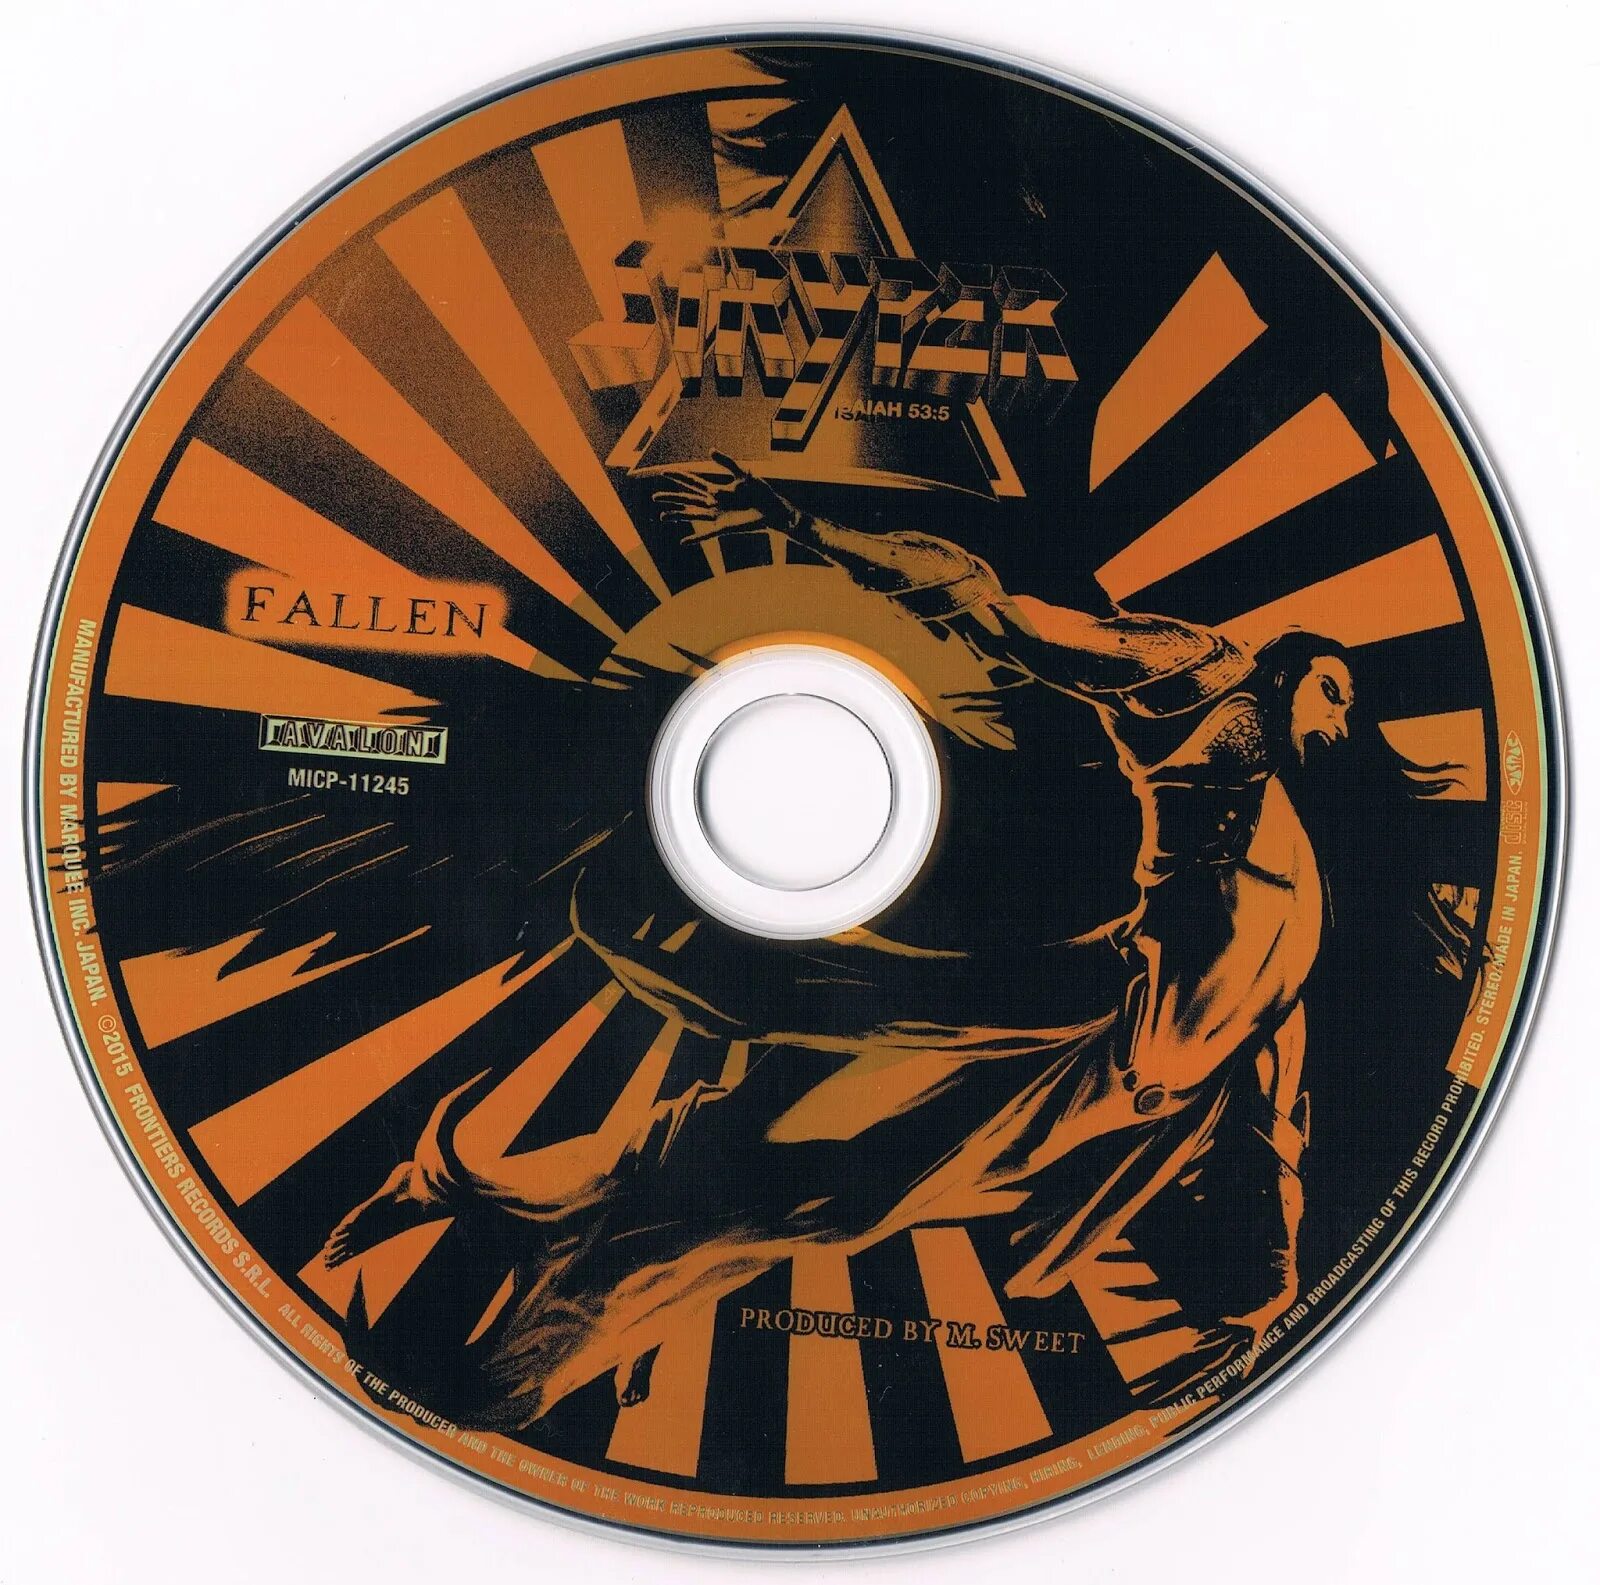 Flac 2015. Группа Stryper - альбом Fallen. Stryper no more Hell to pay.